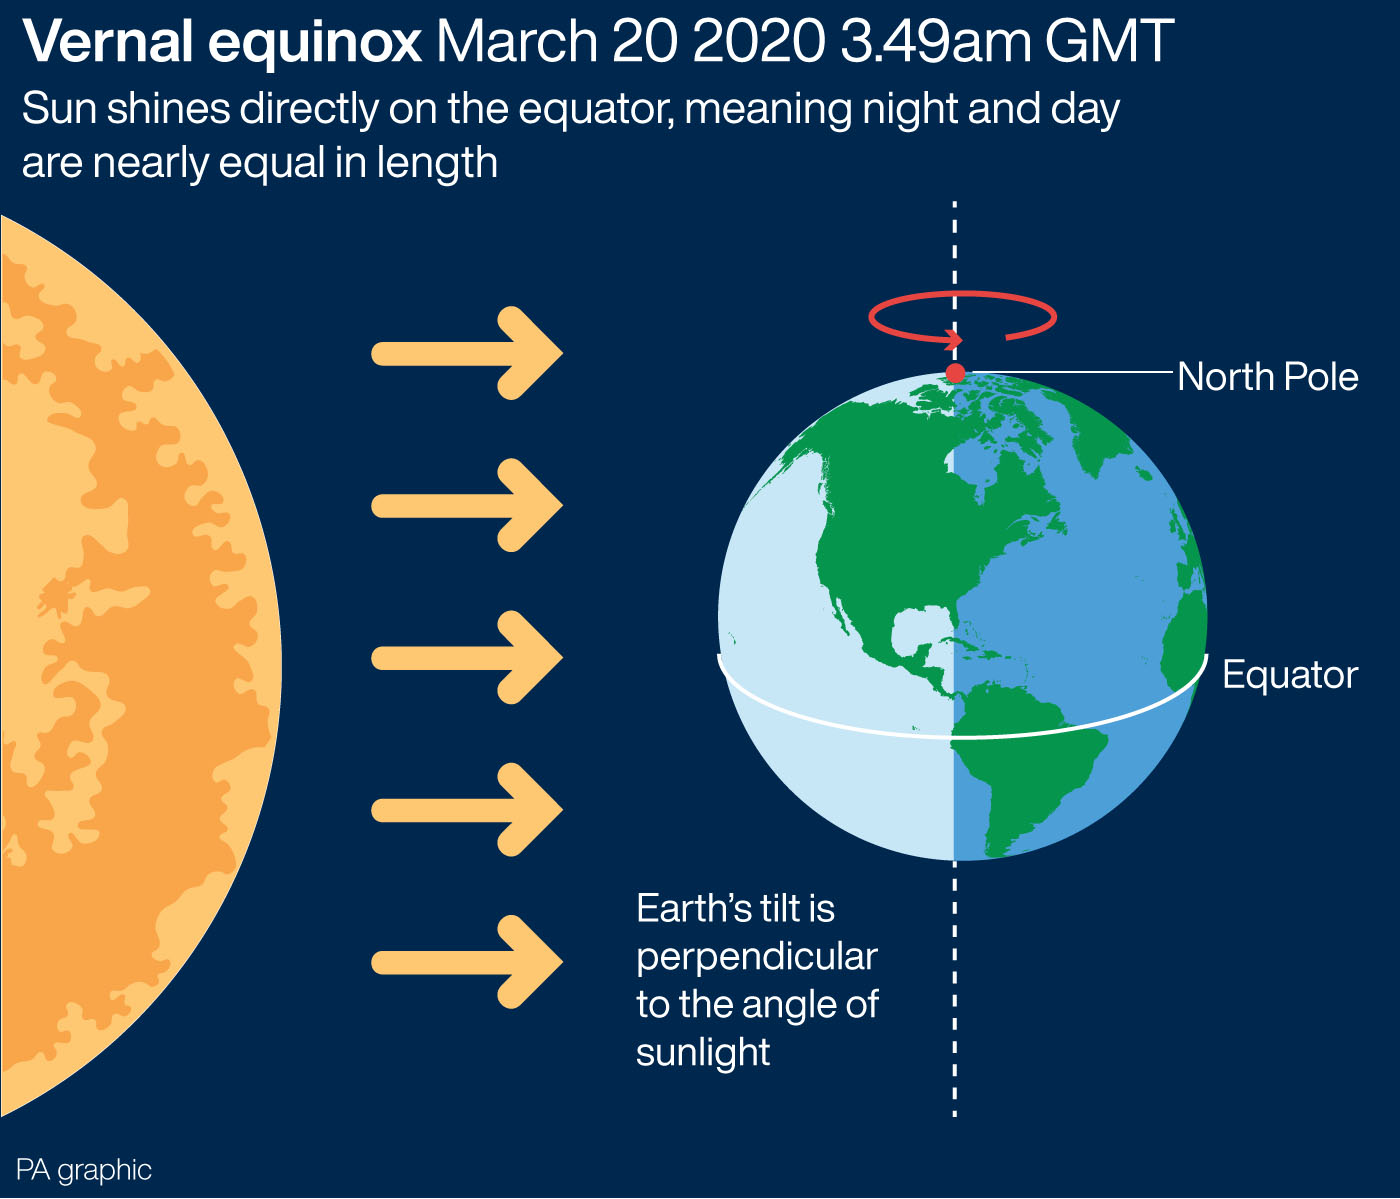 set to put on a show for earliest March equinox in 124 years